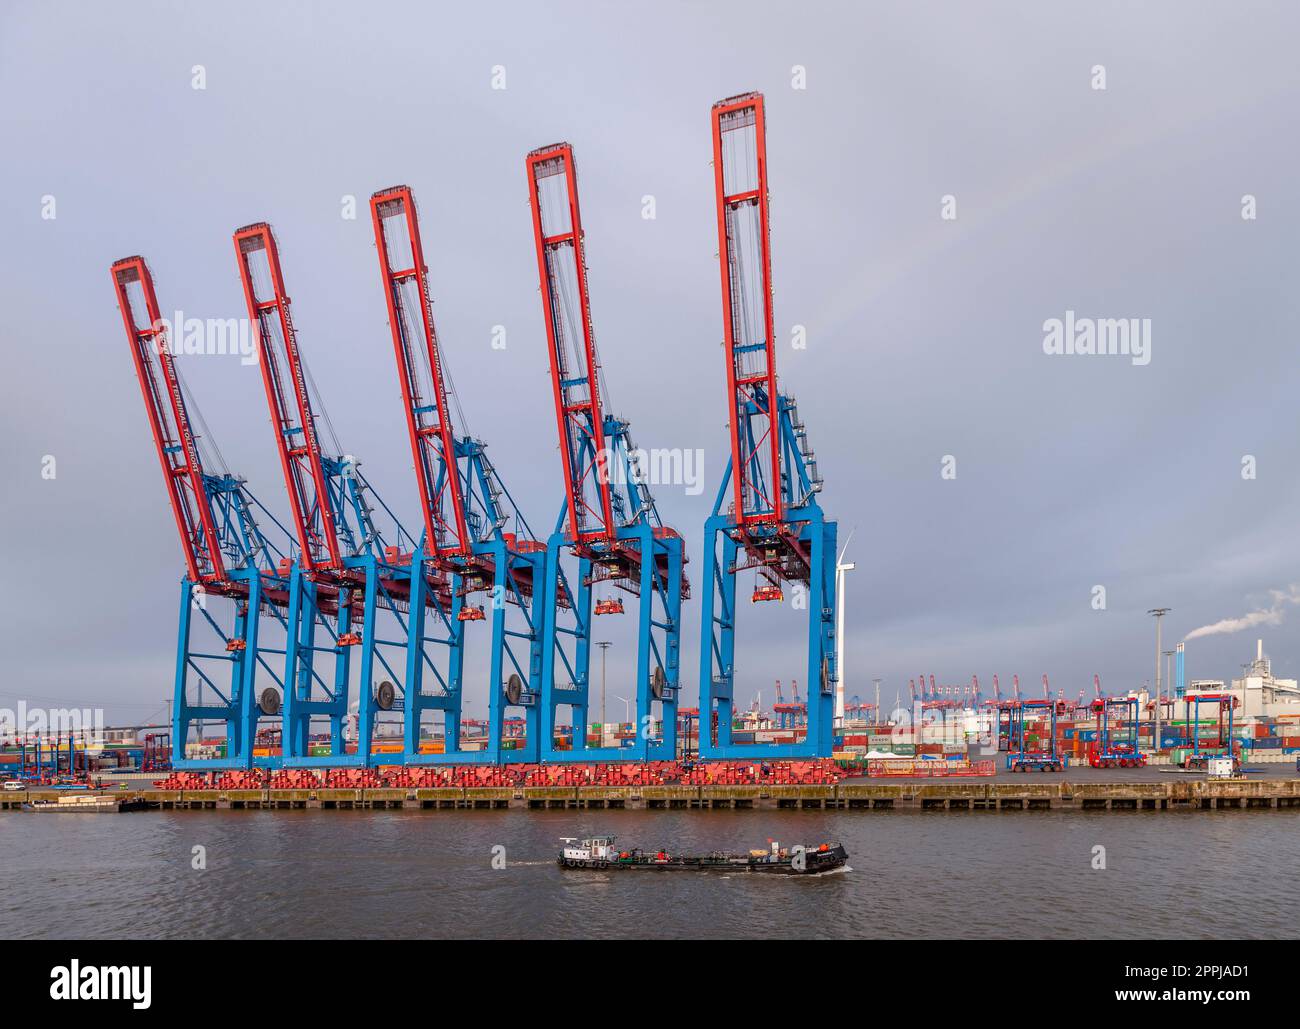 Container Terminal Tollerort, DCP Dettmer Container Packing GmbH & Co. Container dock, Amburgo, Germania. Foto Stock